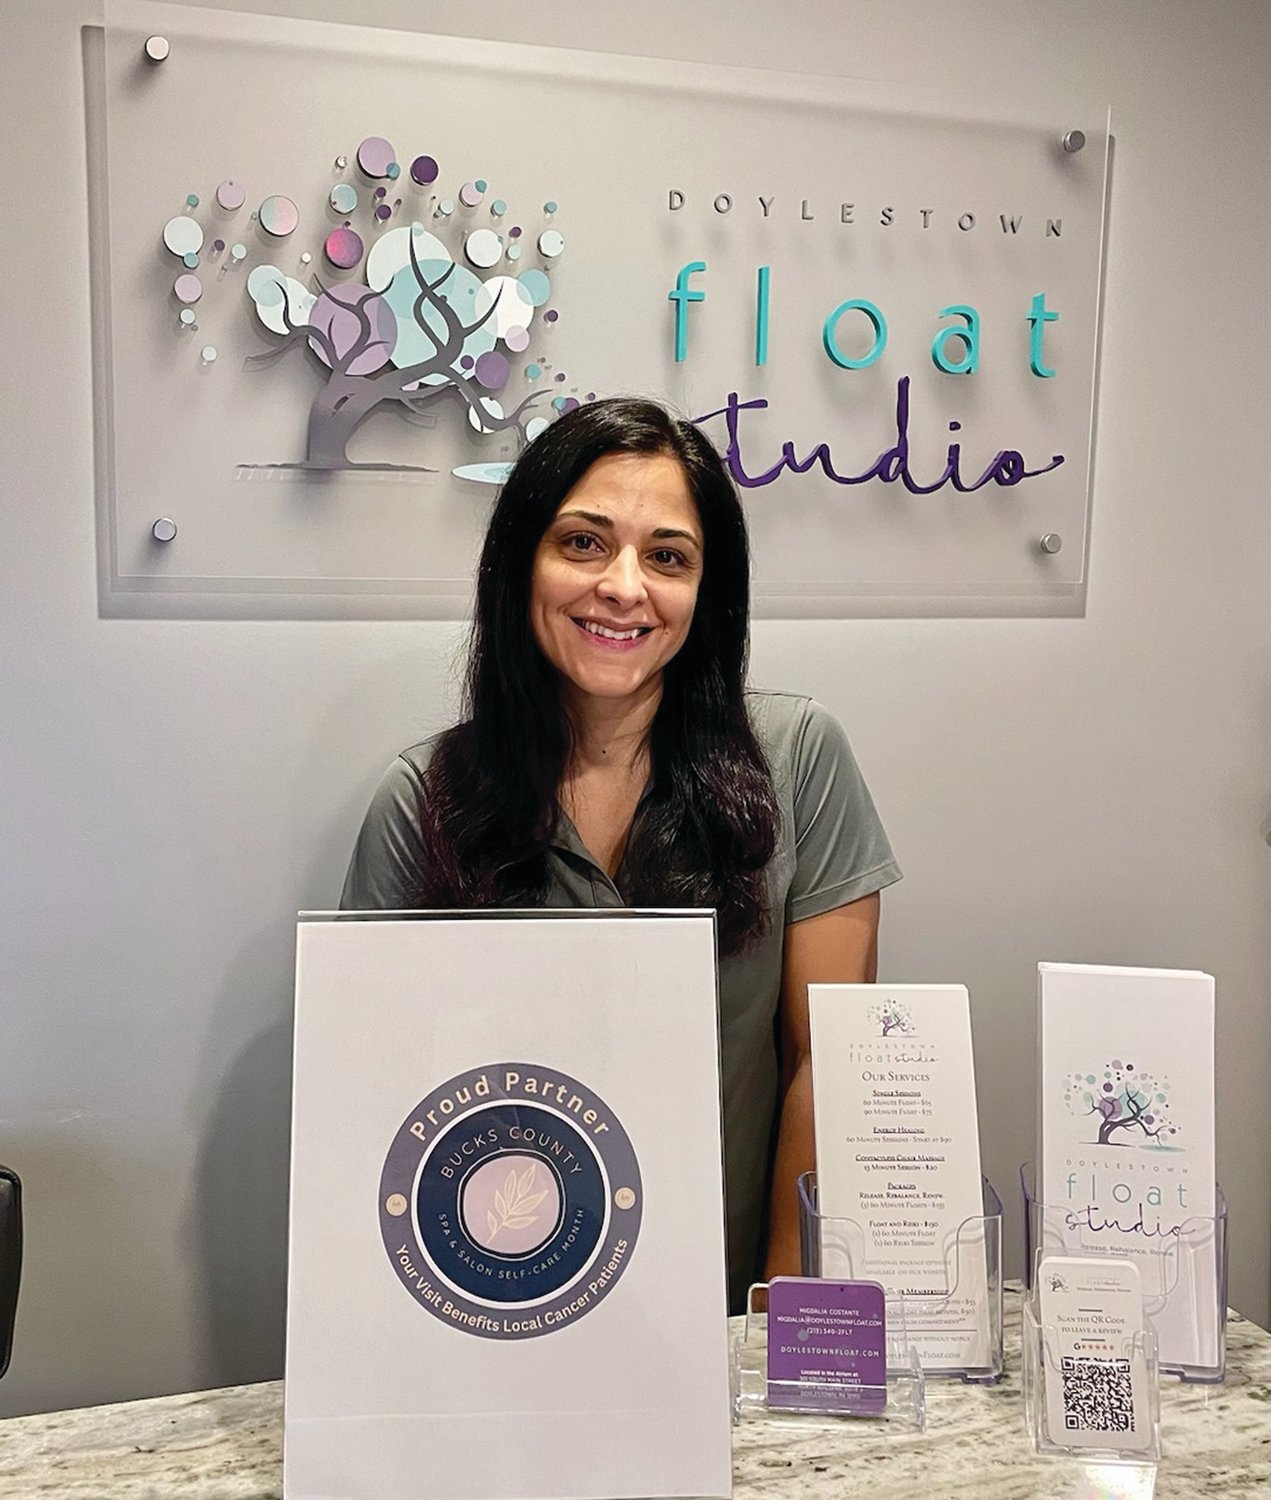 Migdalia Costante of Doylestown Float Studio is taking part in Bucks County Spa and Salon Self-Care Month to benefit Kin.